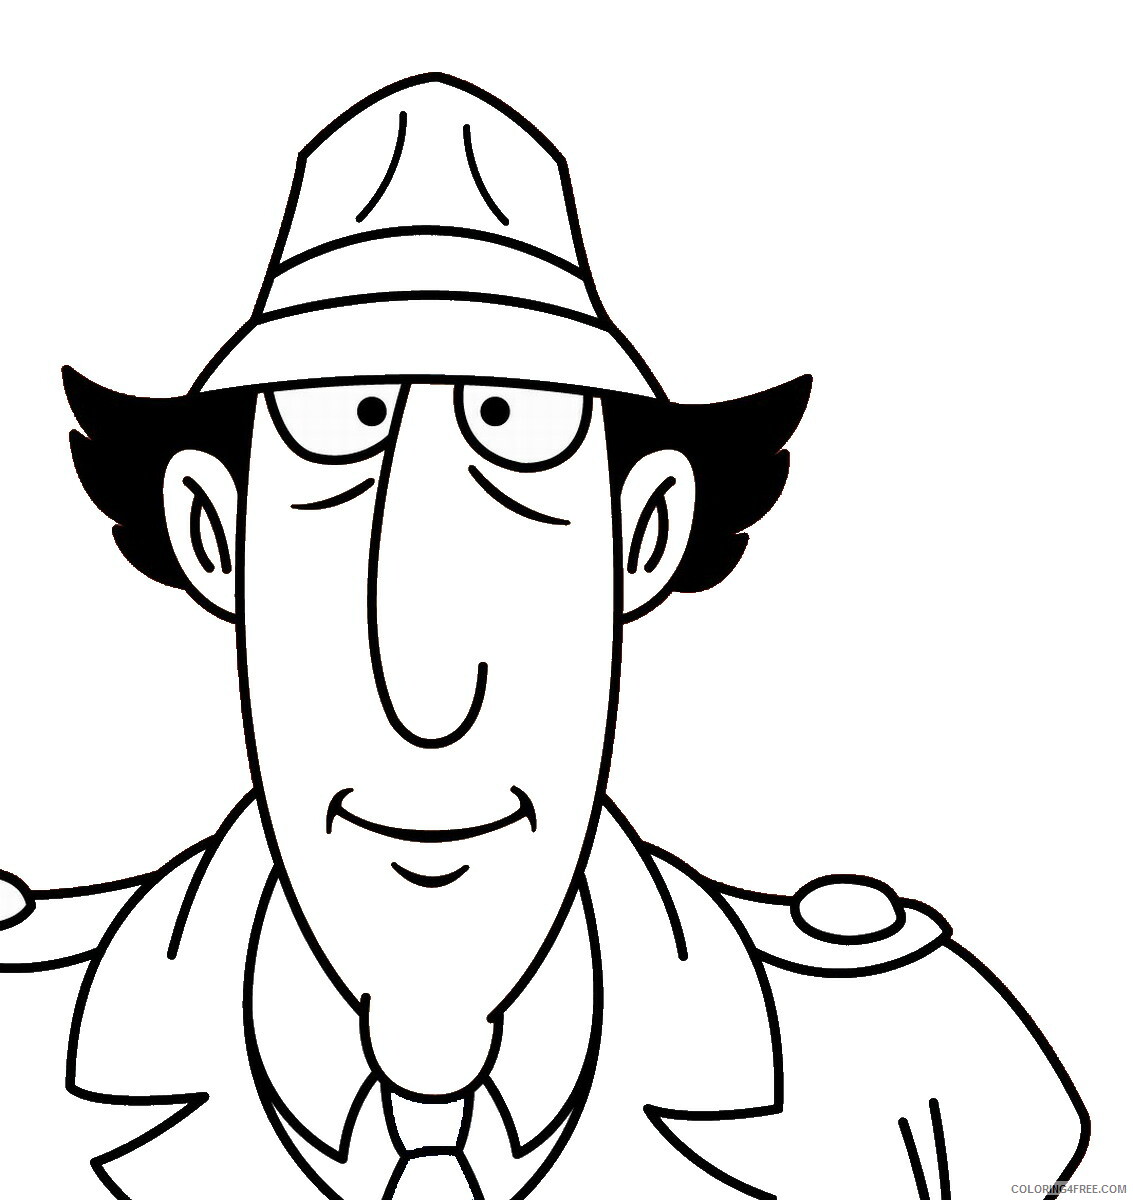 Inspector Gadget Coloring Pages TV Film inspector_gadget_15 Printable 2020 04008 Coloring4free